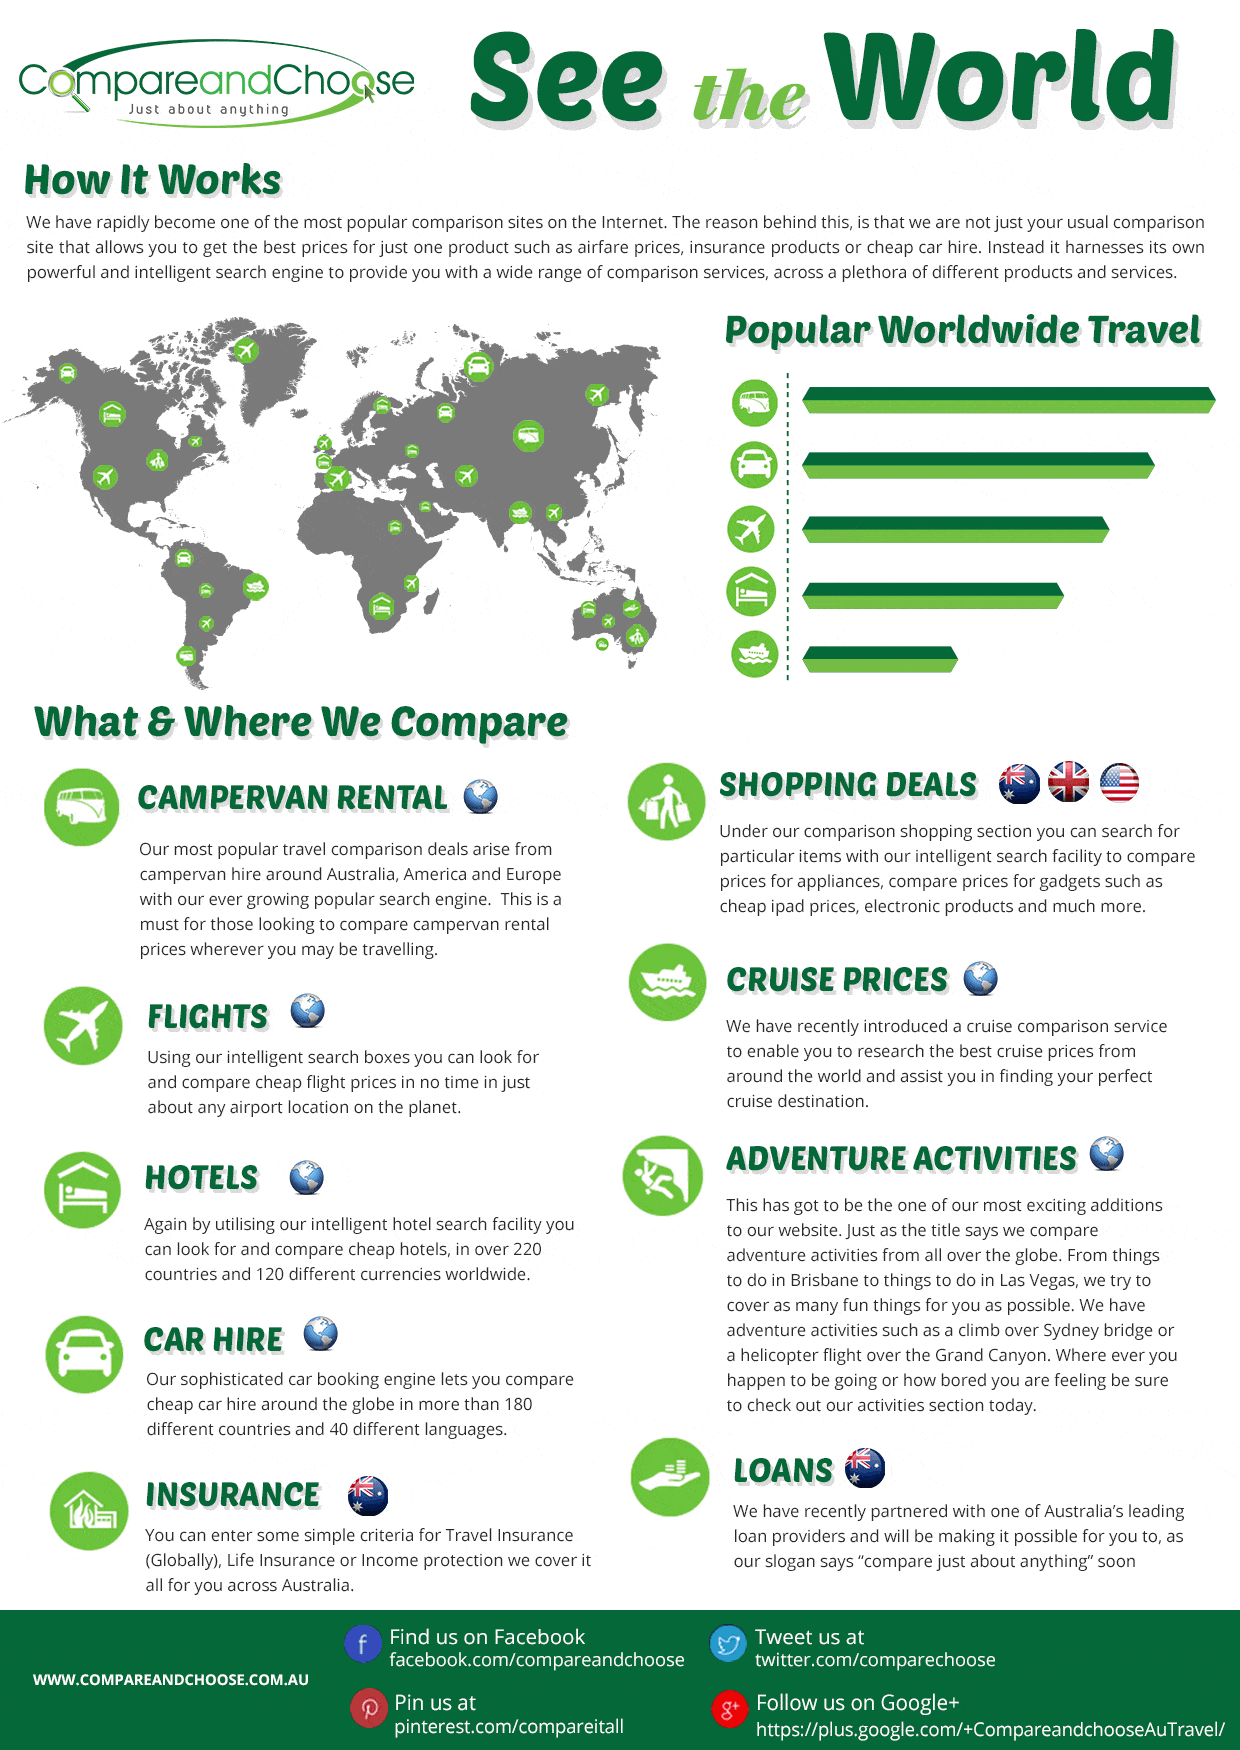 Travel InfoGraphic Compare and Choose